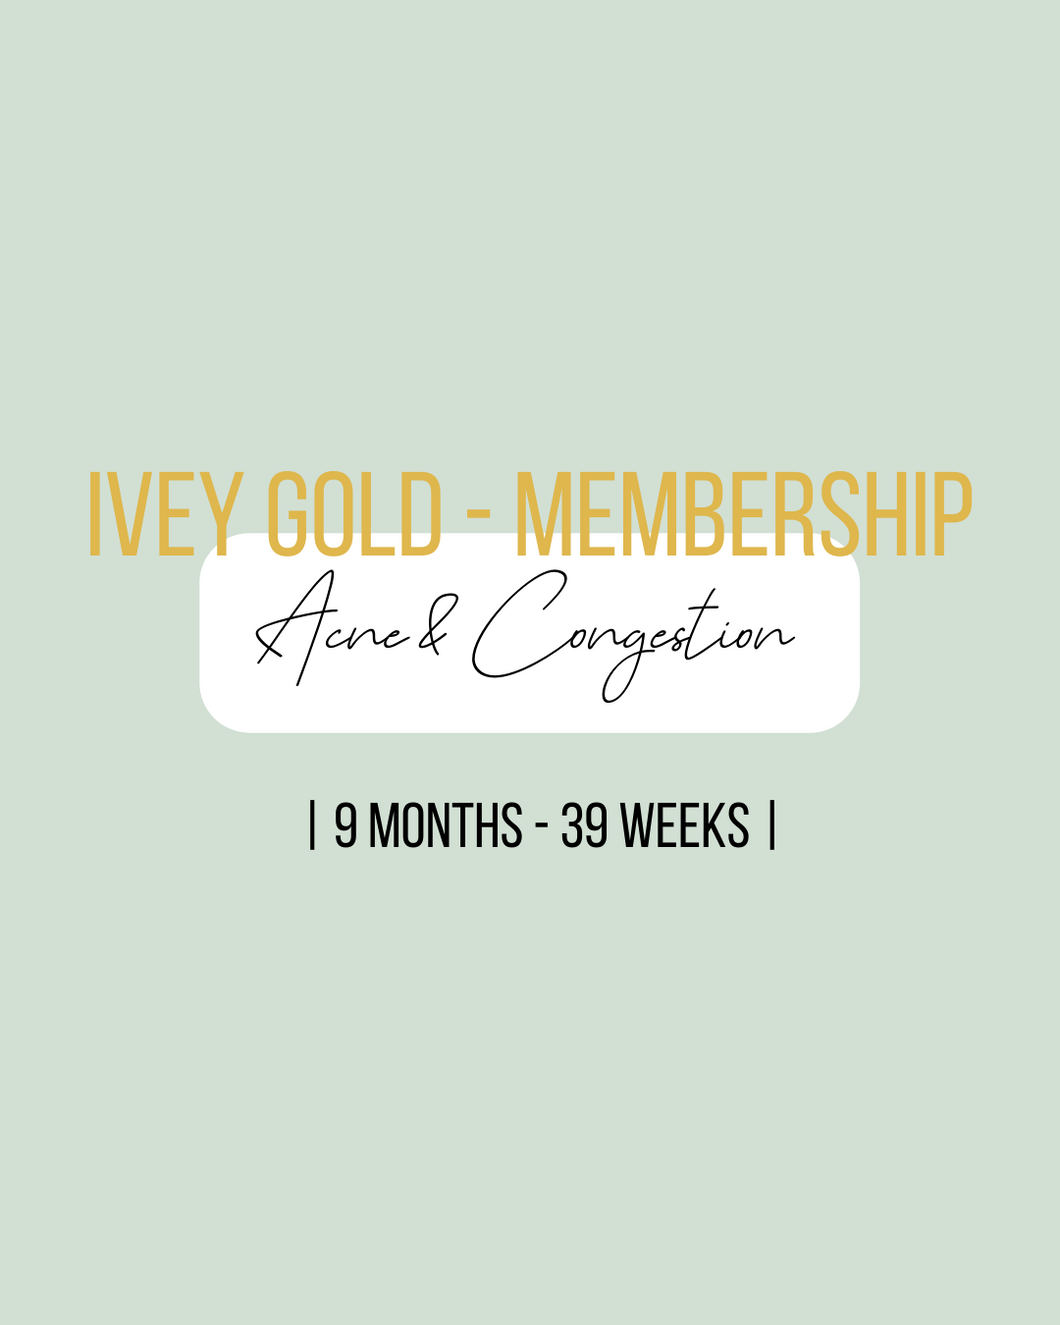 Acne & Congestion Membership 9 Months